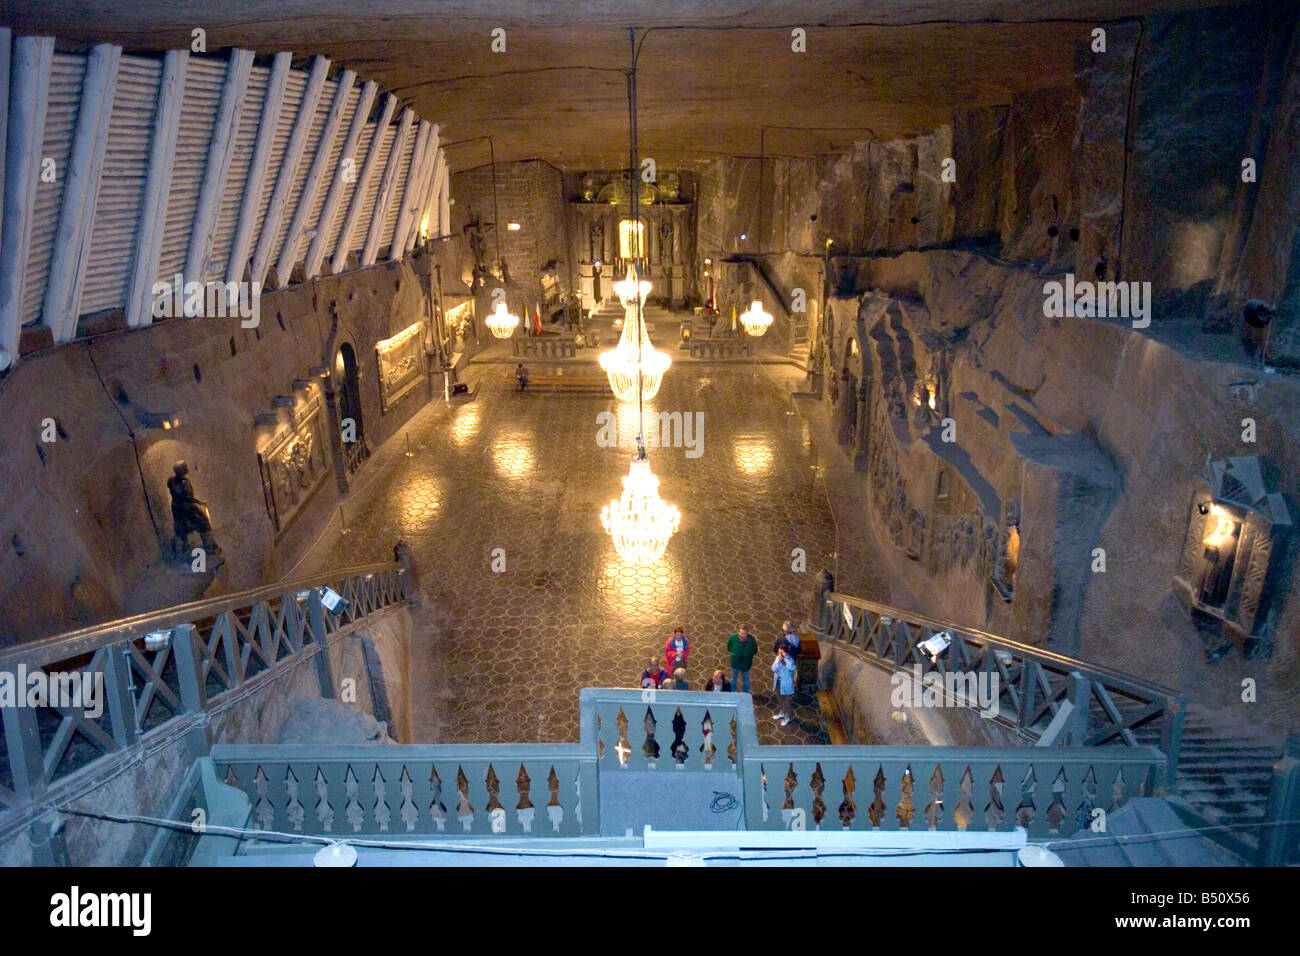 An Aerial view of tourists in St Kinga's Chapel of the Wieliczka Salt Mines showing the large chandeliers carved from rock salt. Stock Photo